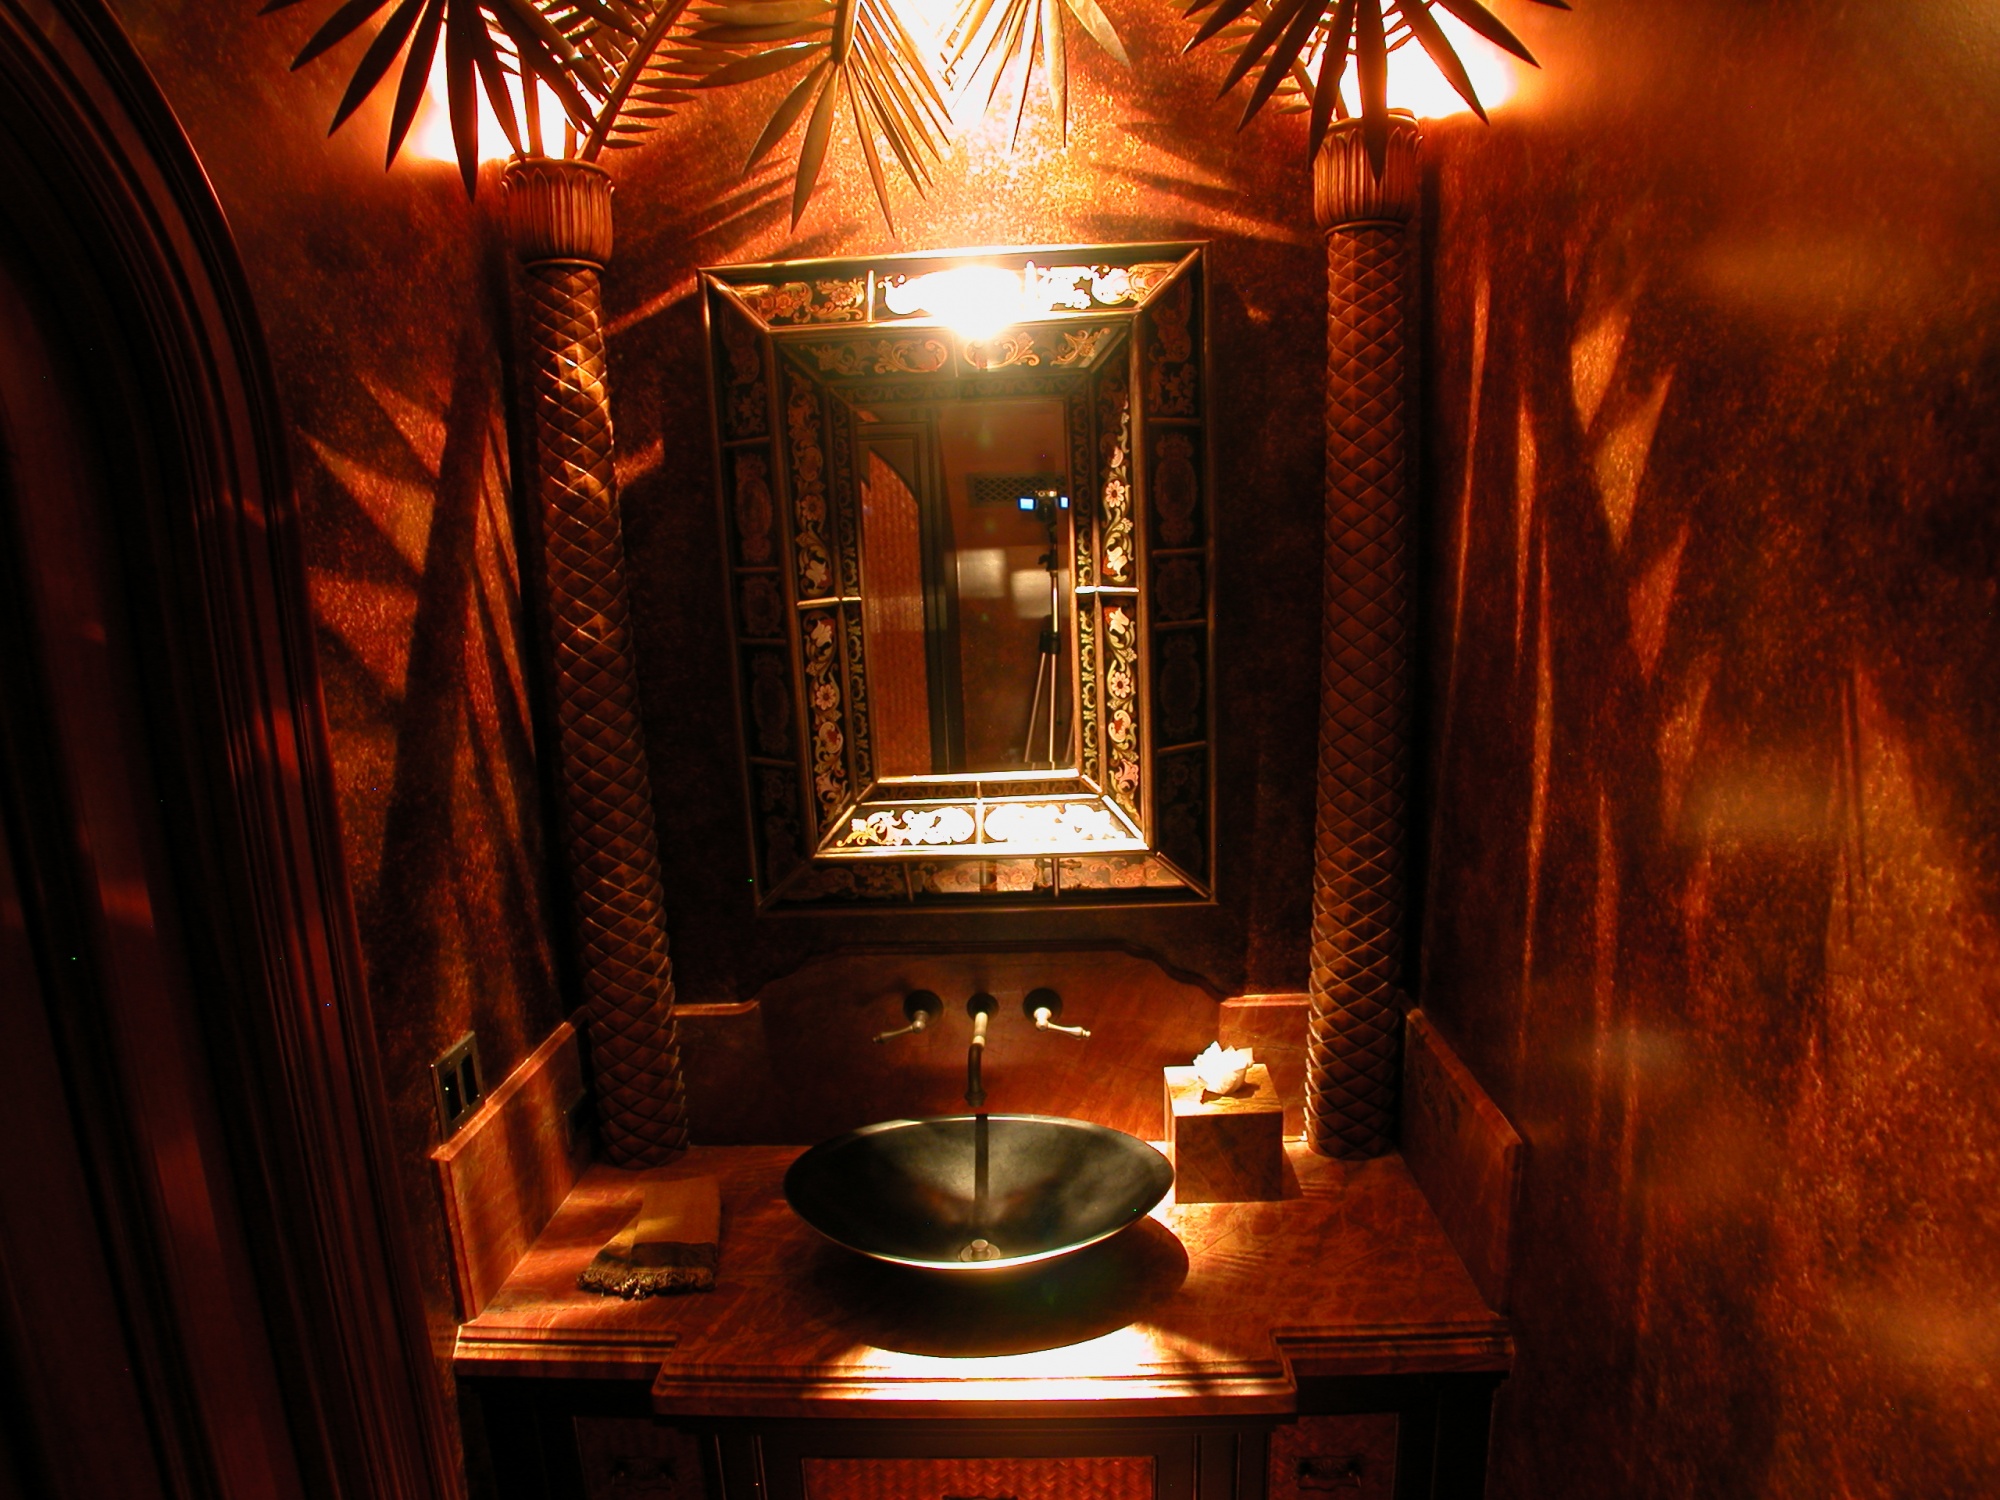 Hand carved palm trees are featured in this powder bath.